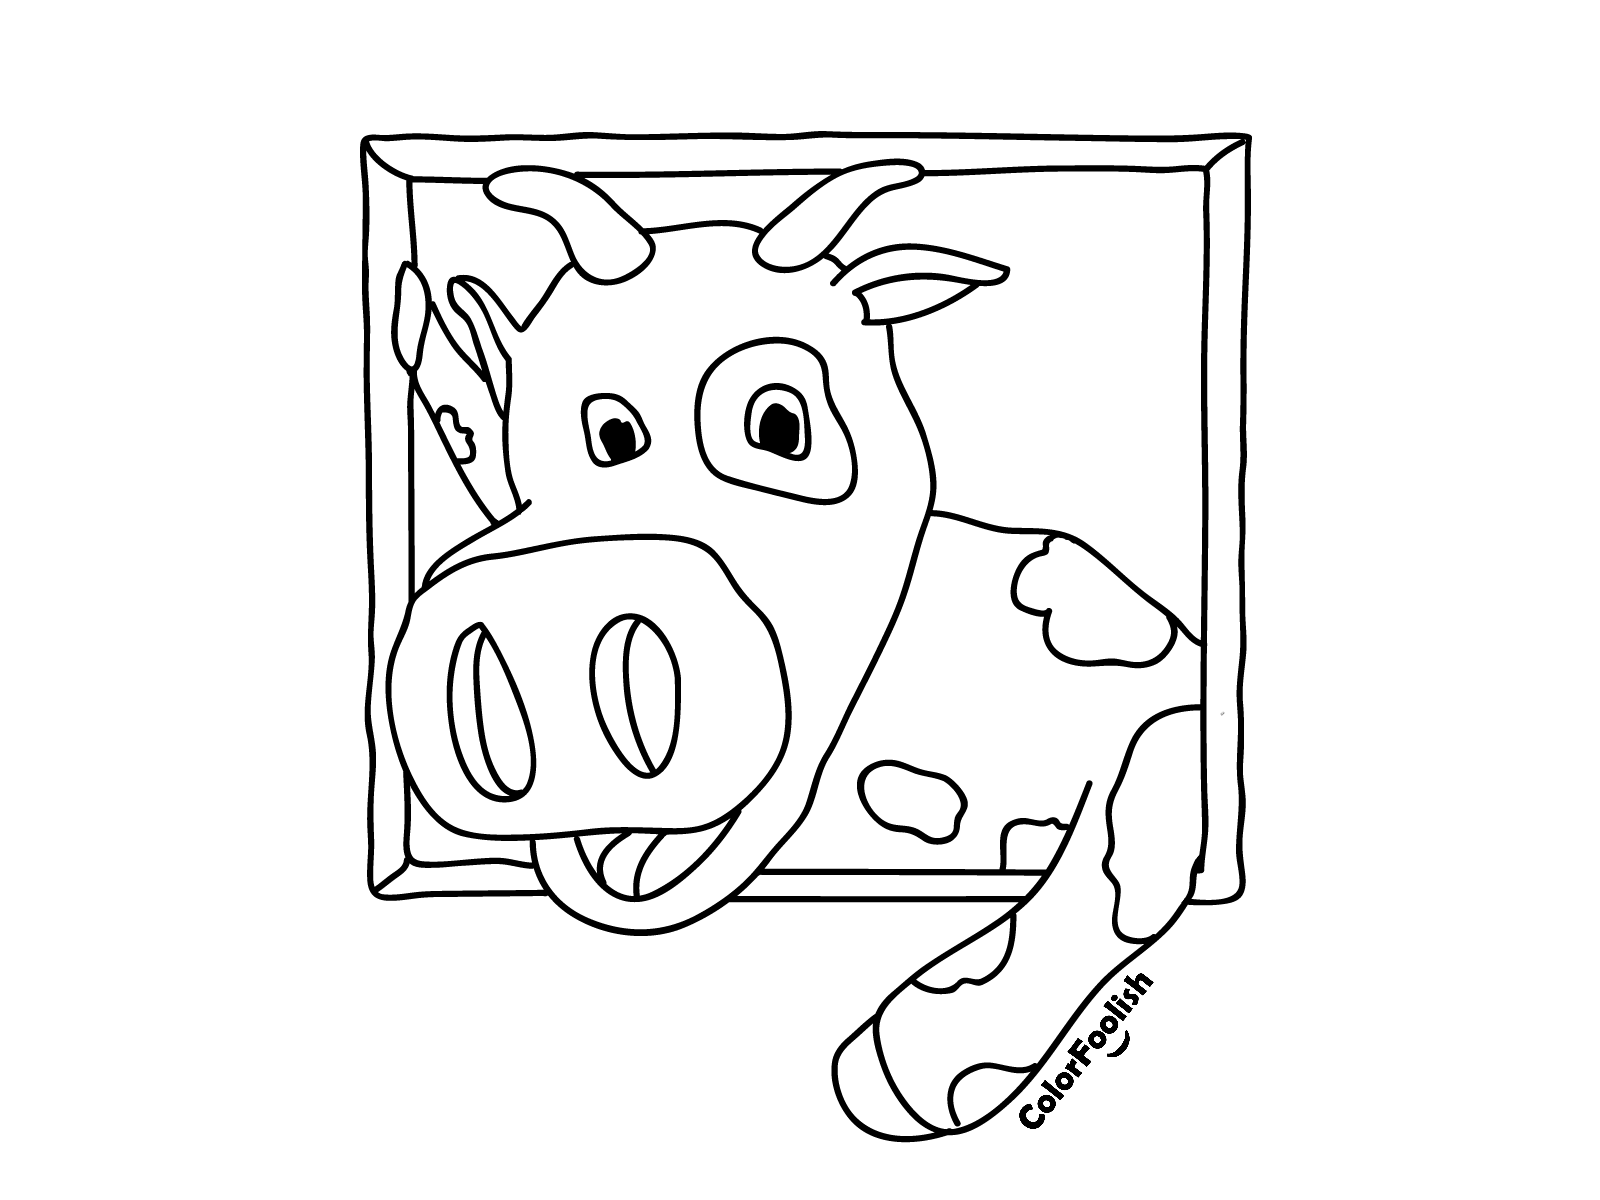 Coloring page of smiling cow